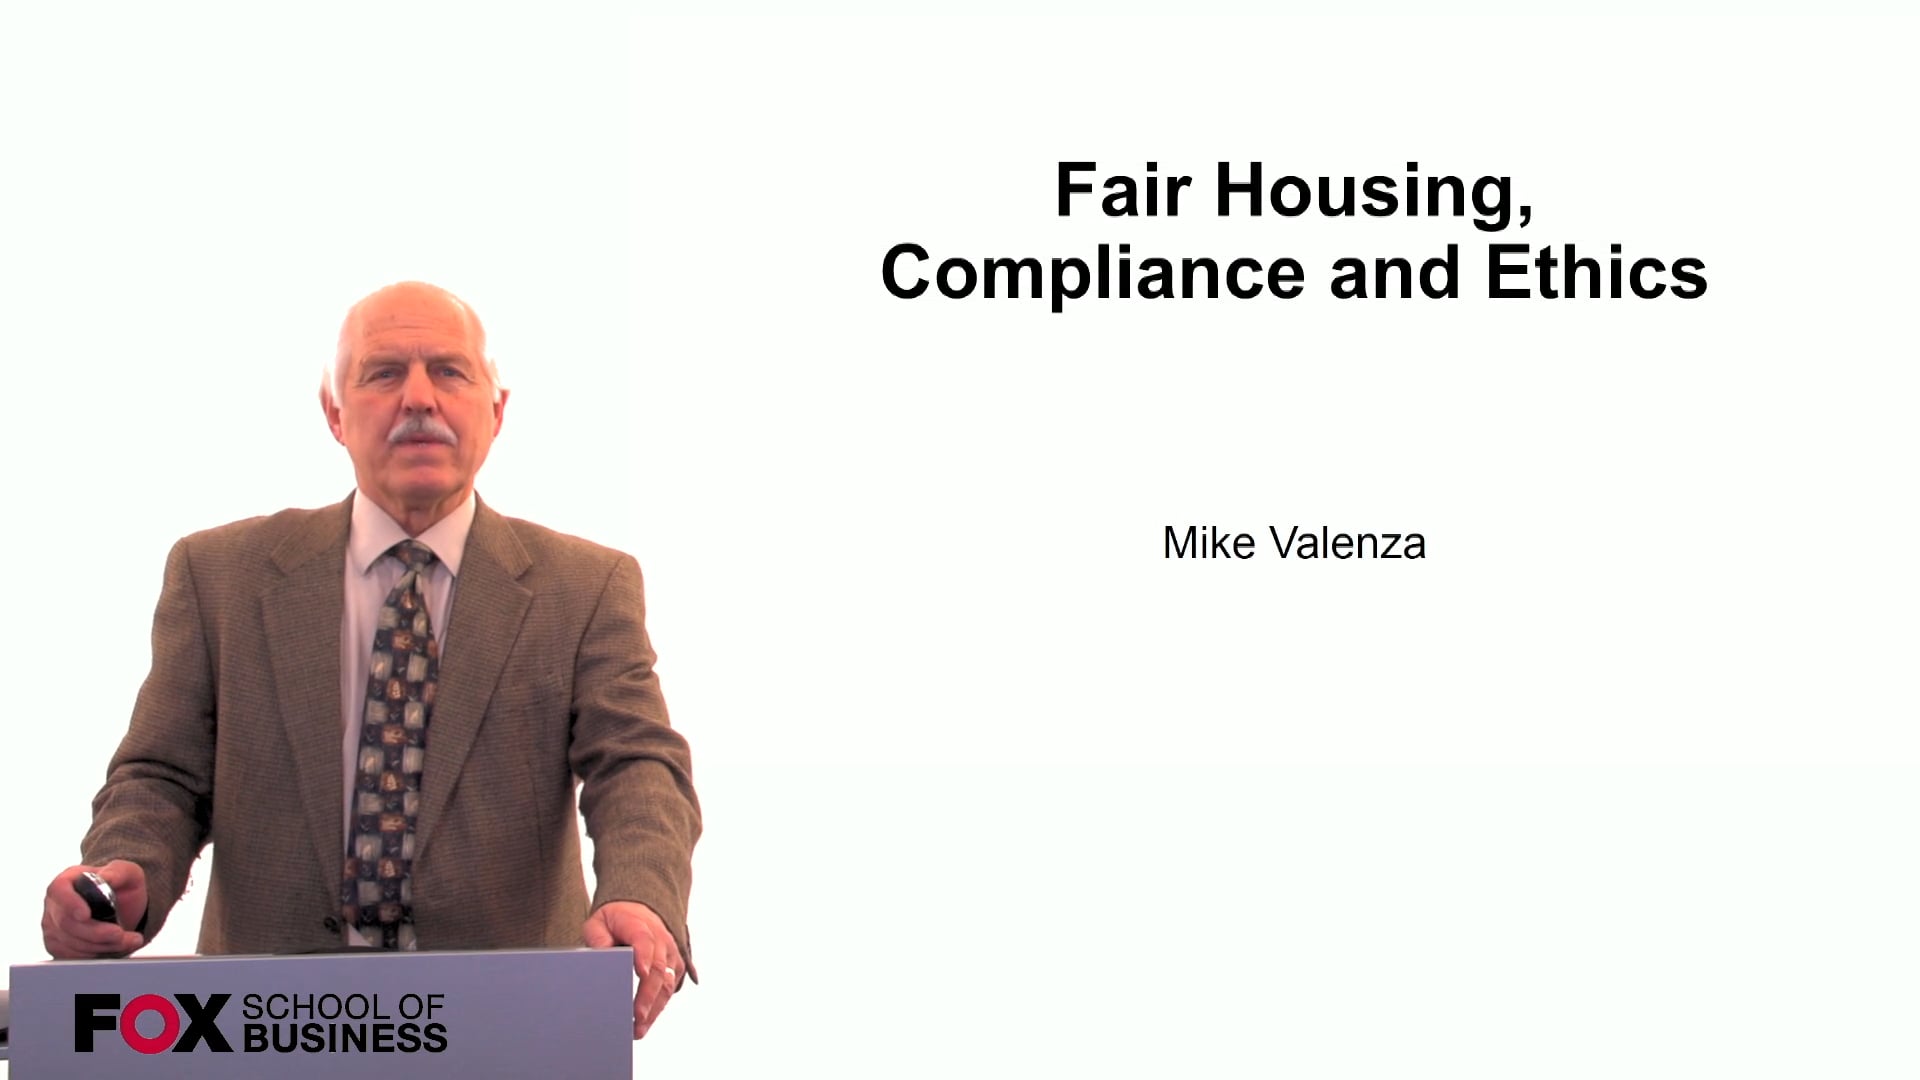 Fair Housing, Compliance and Ethics